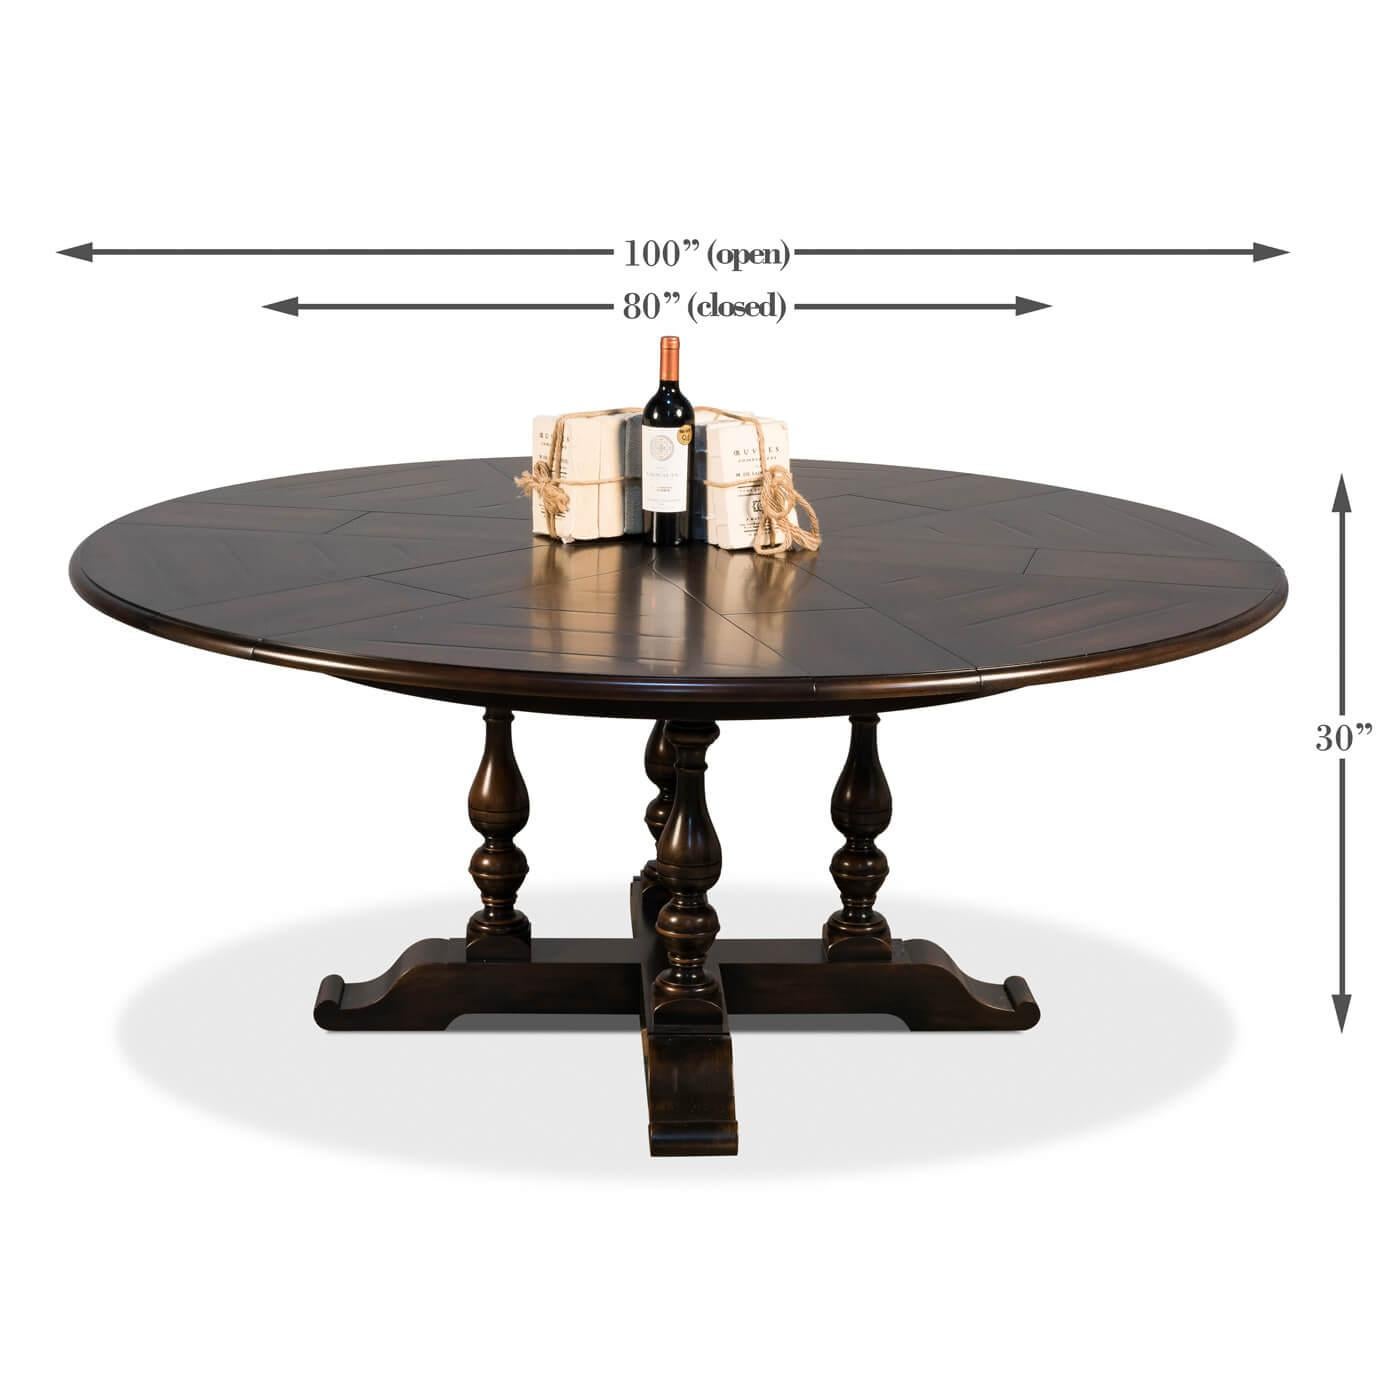 English Style Round Extension Dining Table, Ebony Finish For Sale 1